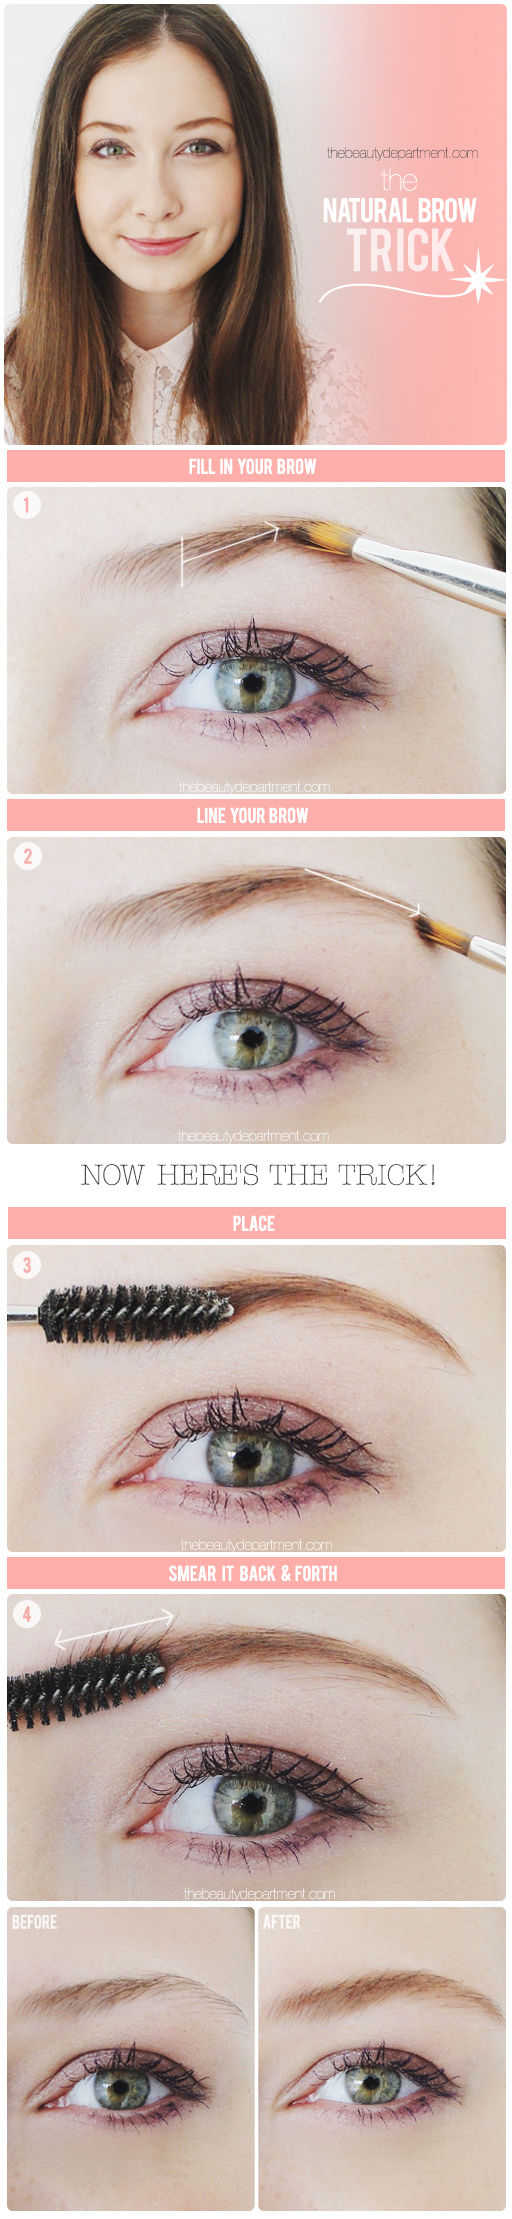 14 Super Easy Makeup Tips for Looking Perfect